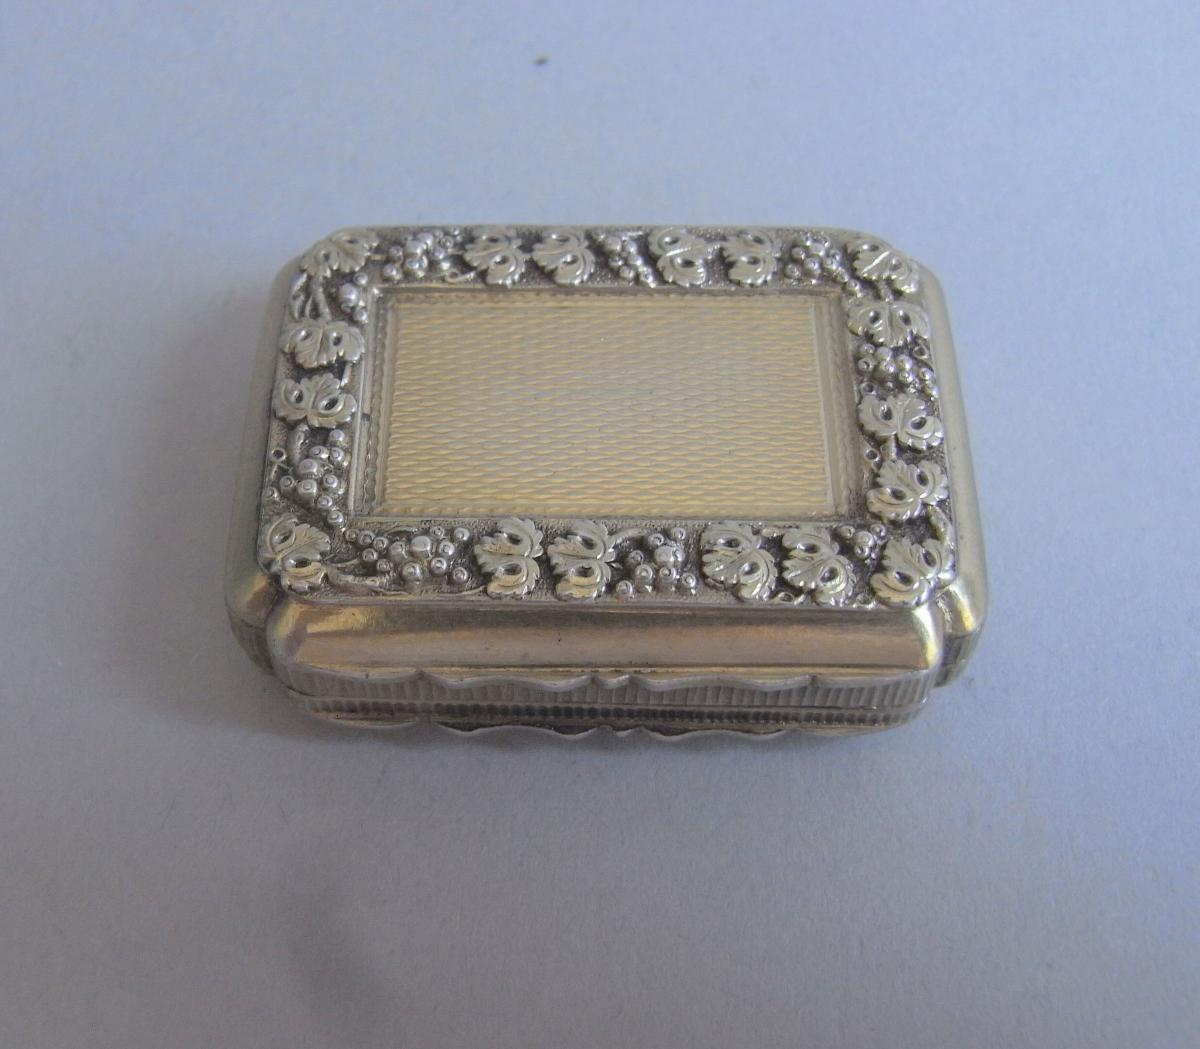 An exceptionally fine George III Silver Gilt Vinaigrette made in Birmingham in 1816 by Matthew Linwood